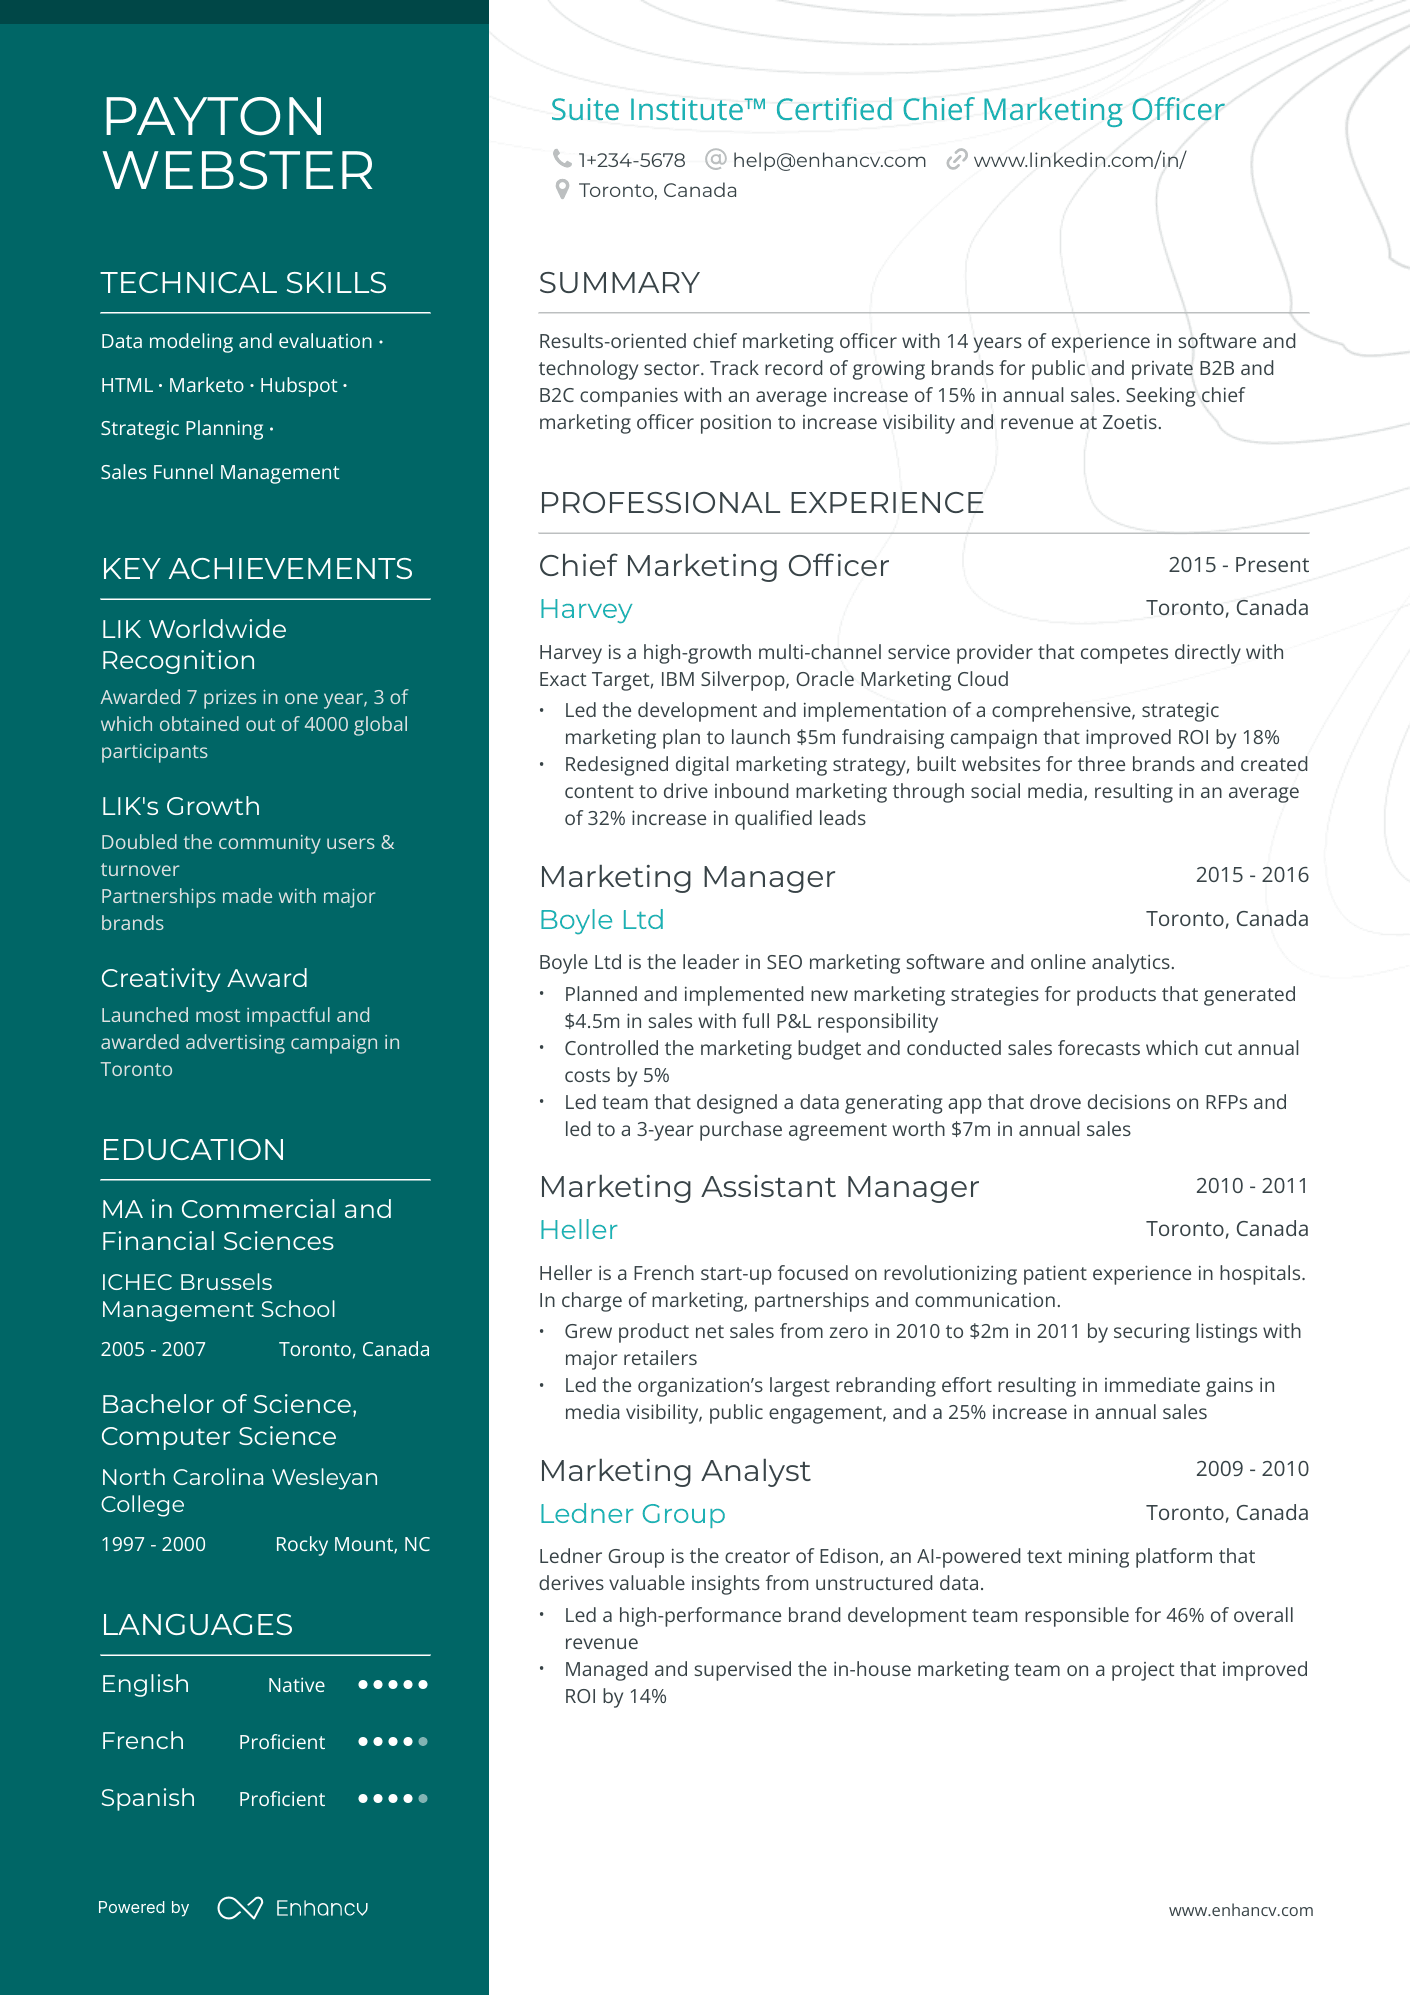 Suite Institute™ Certified Chief Marketing Officer resume example